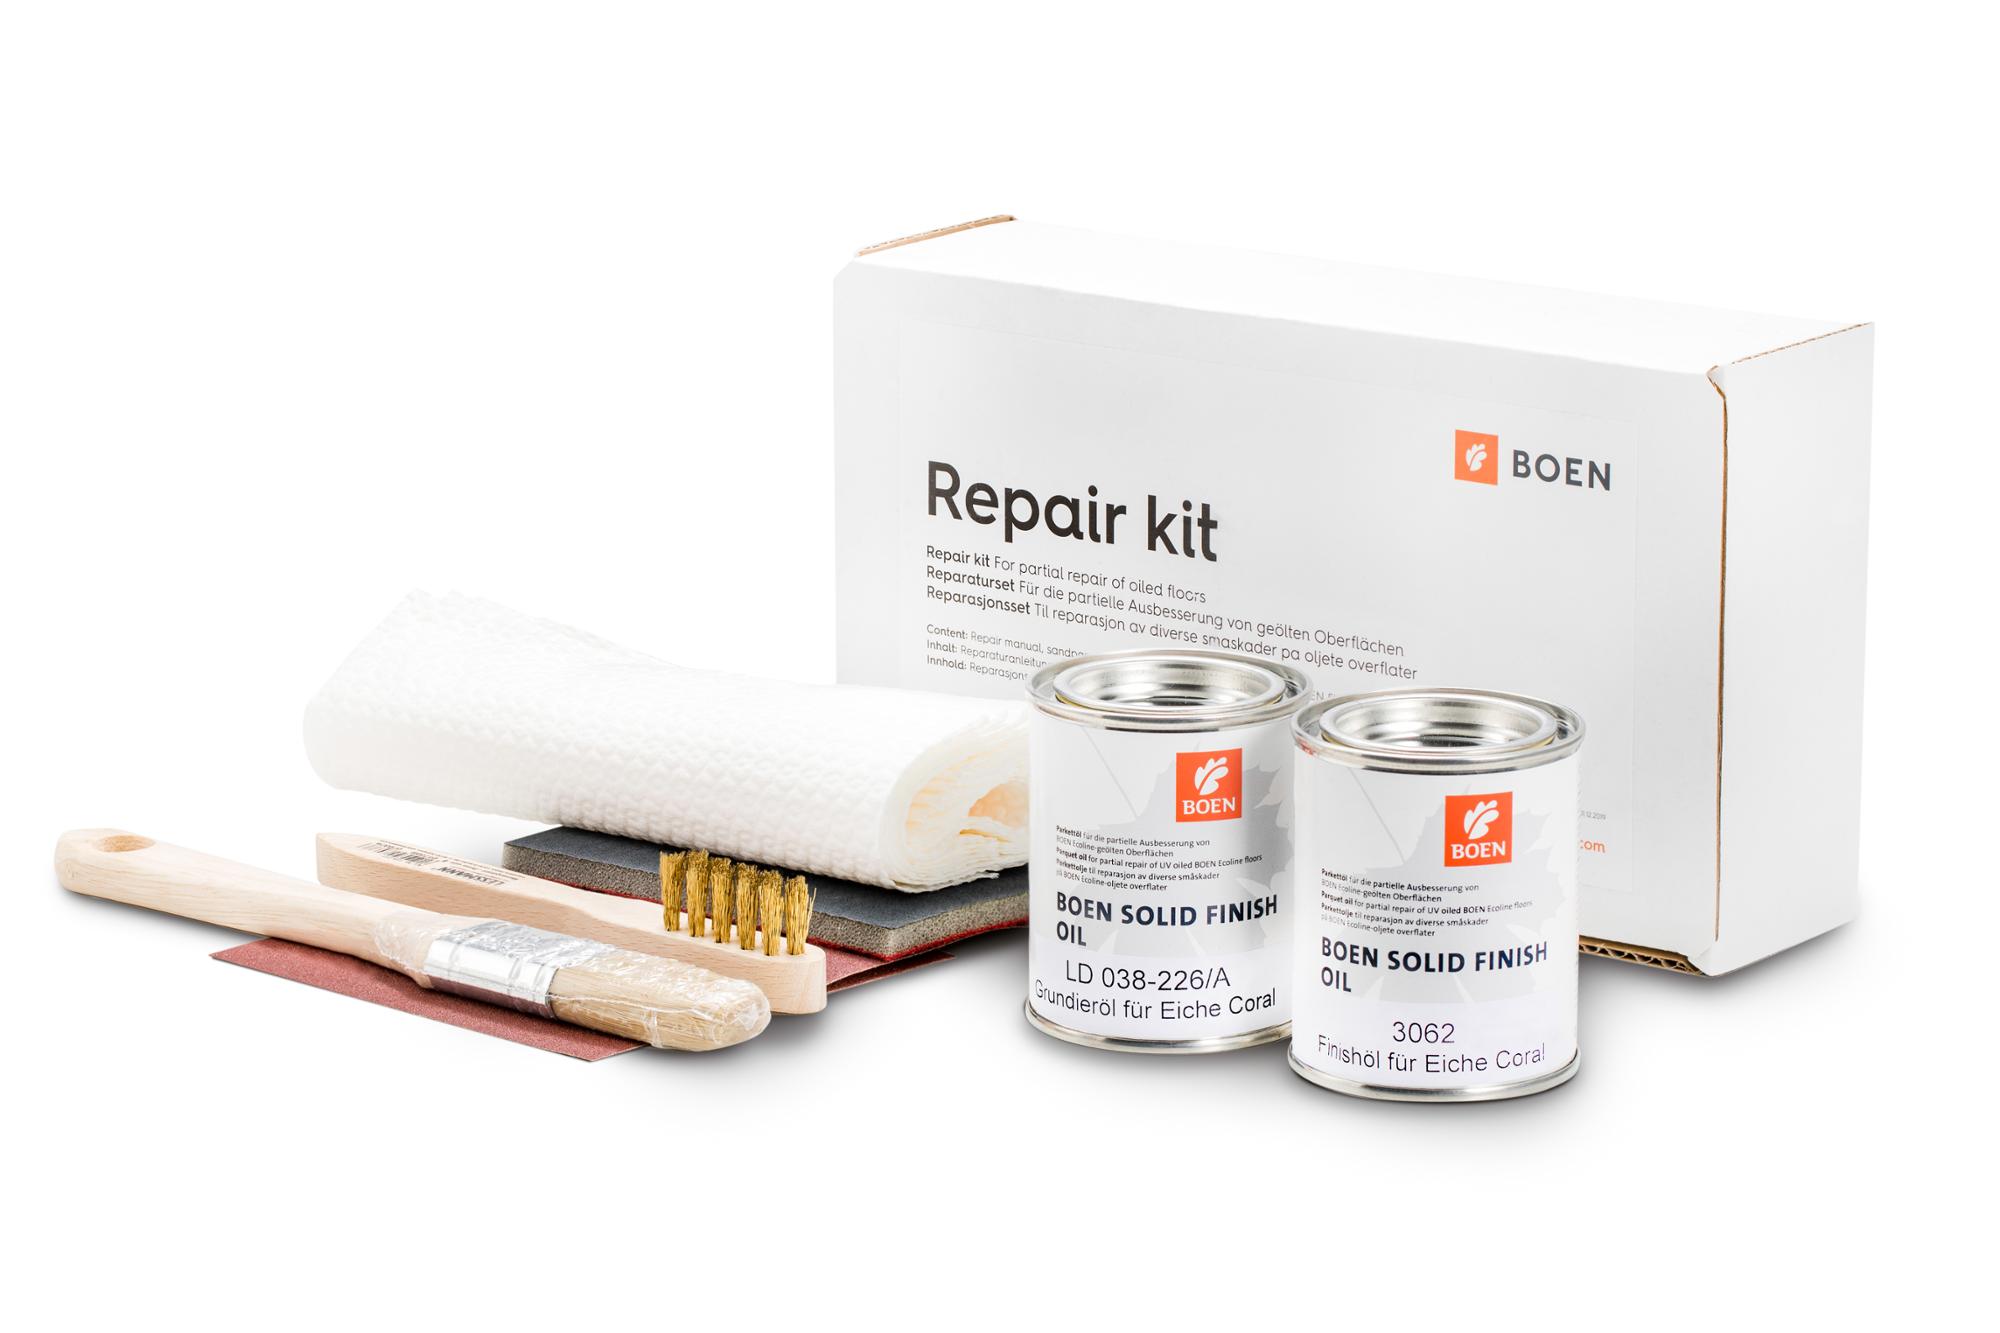 BOEN kit riparazione per Rovere  Coral / White Nights

For the partial repair of natural oiled surfaces.
Content: Repair instruction, abrasive paper P 150,
abrasive web P 360, 0,125 l BOEN Live Natural Oil,
paint brush, cleaning cloths.